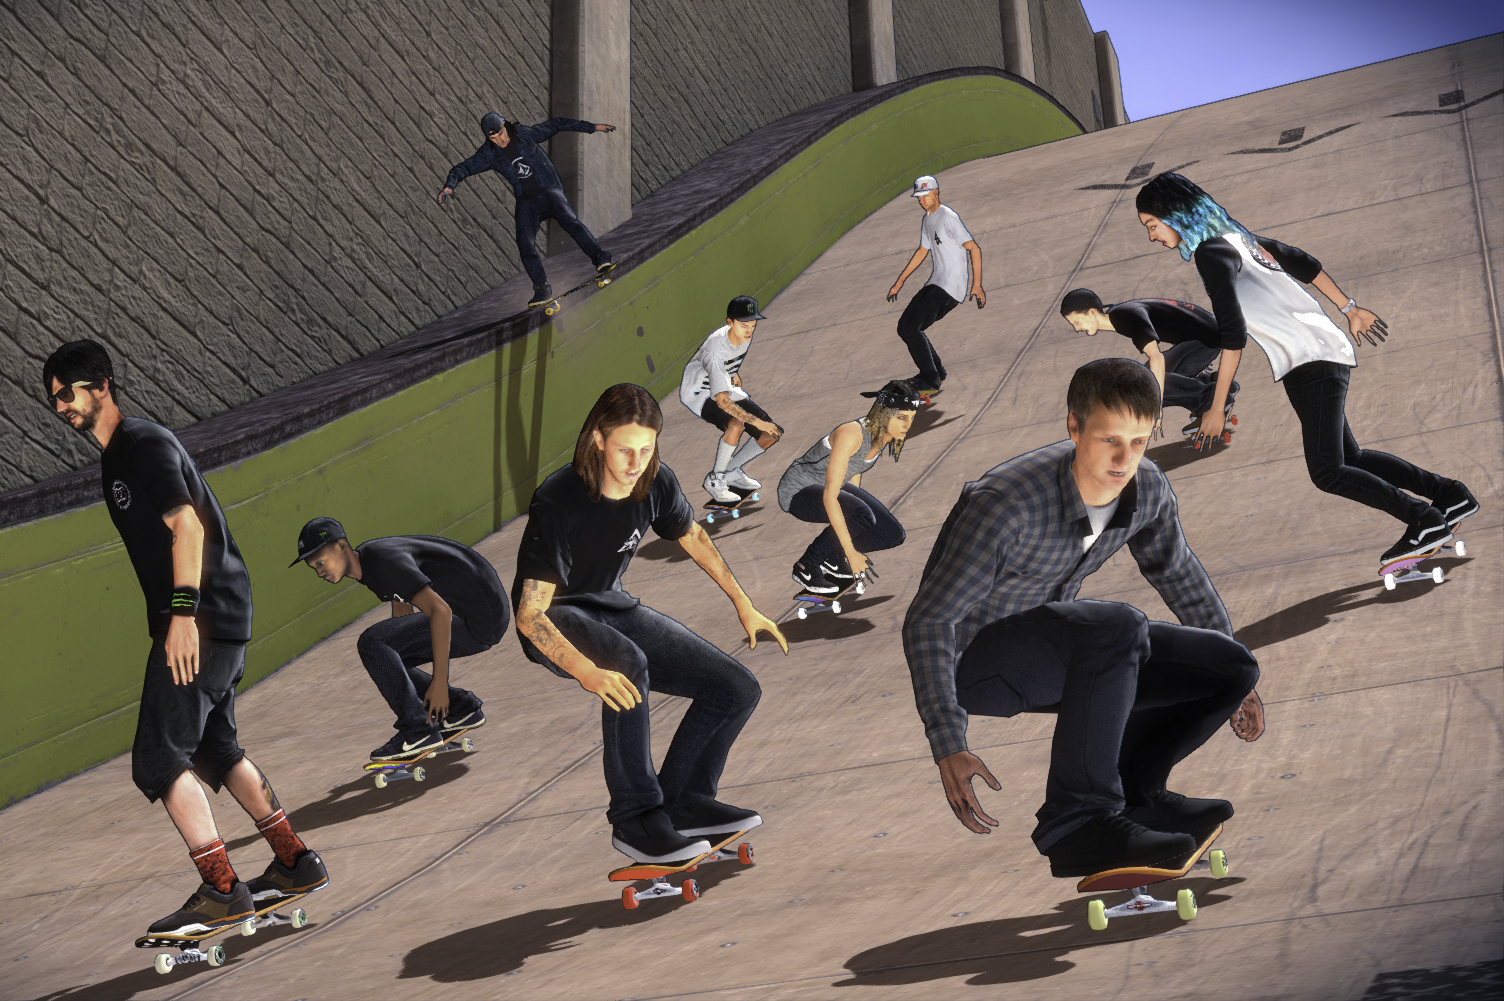 Tony Hawk Pro Skater 5 Review: Gameplay Videos, Features and Impressions | News, Scores, Highlights, Stats, | Bleacher Report